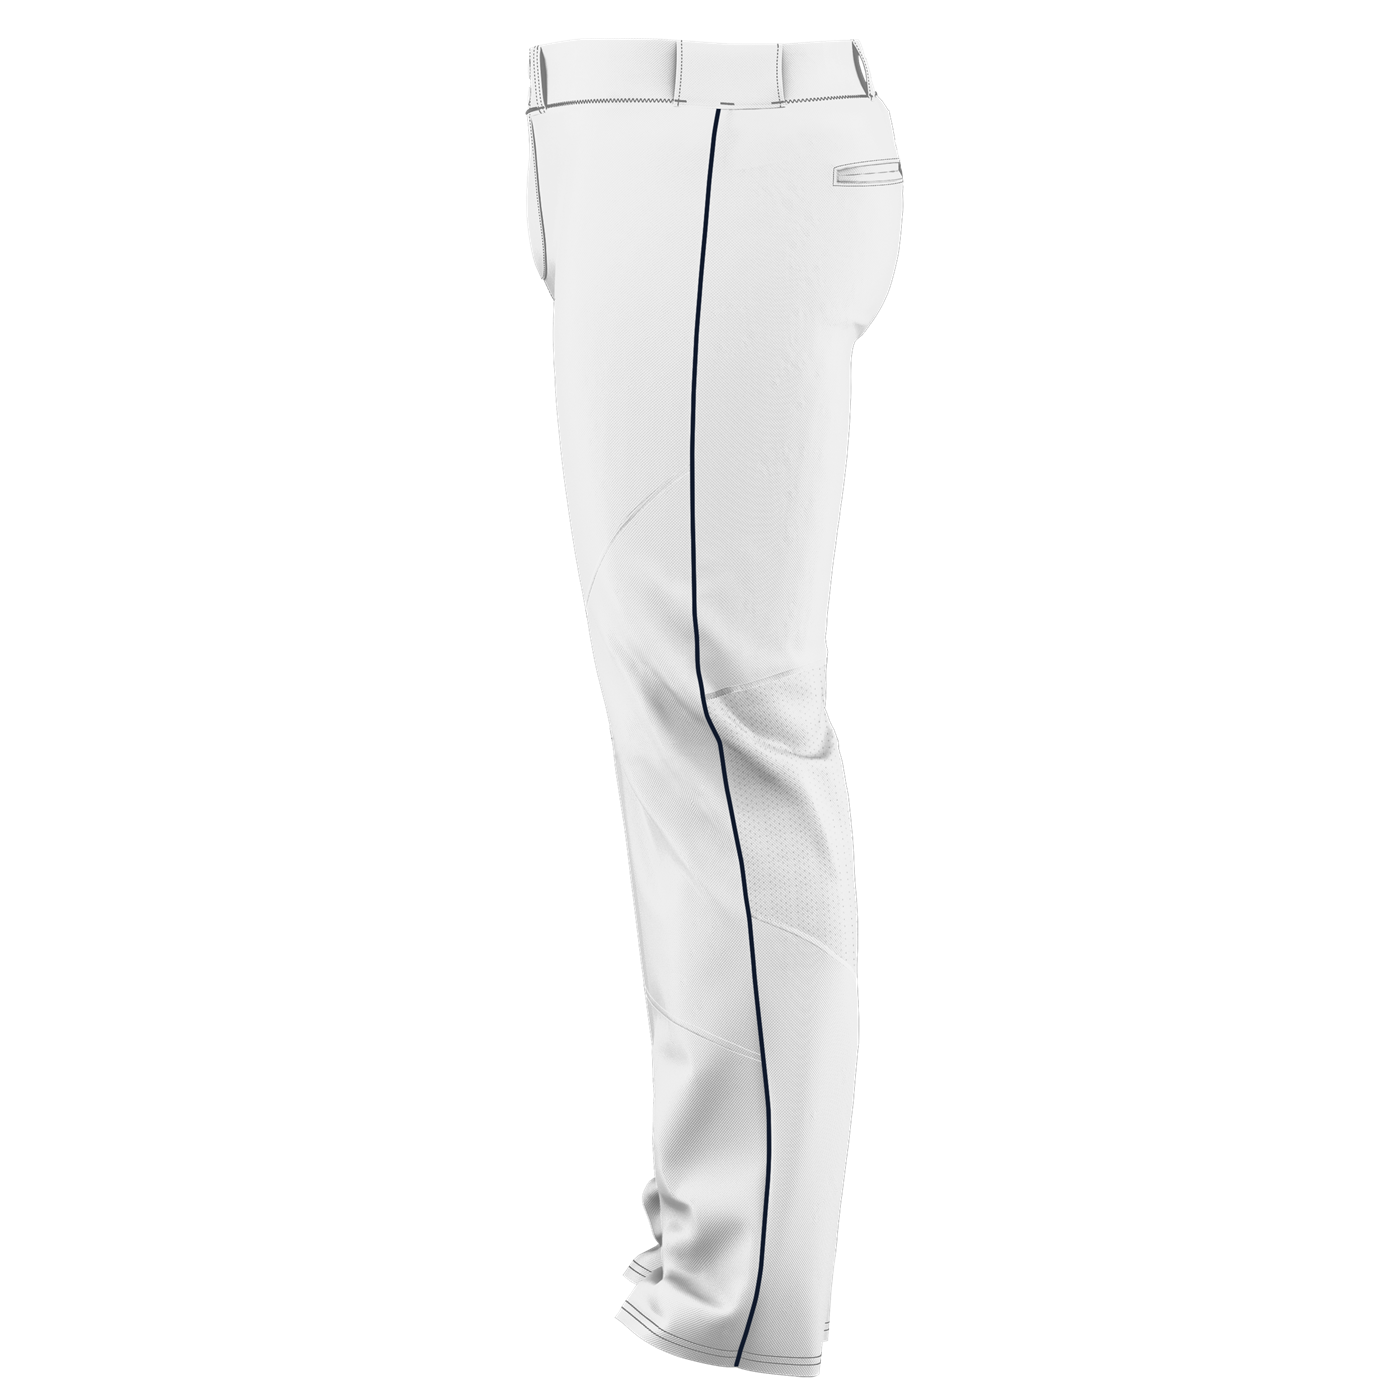 Alleson Ahtletic Men's Baseball Pant with Braid